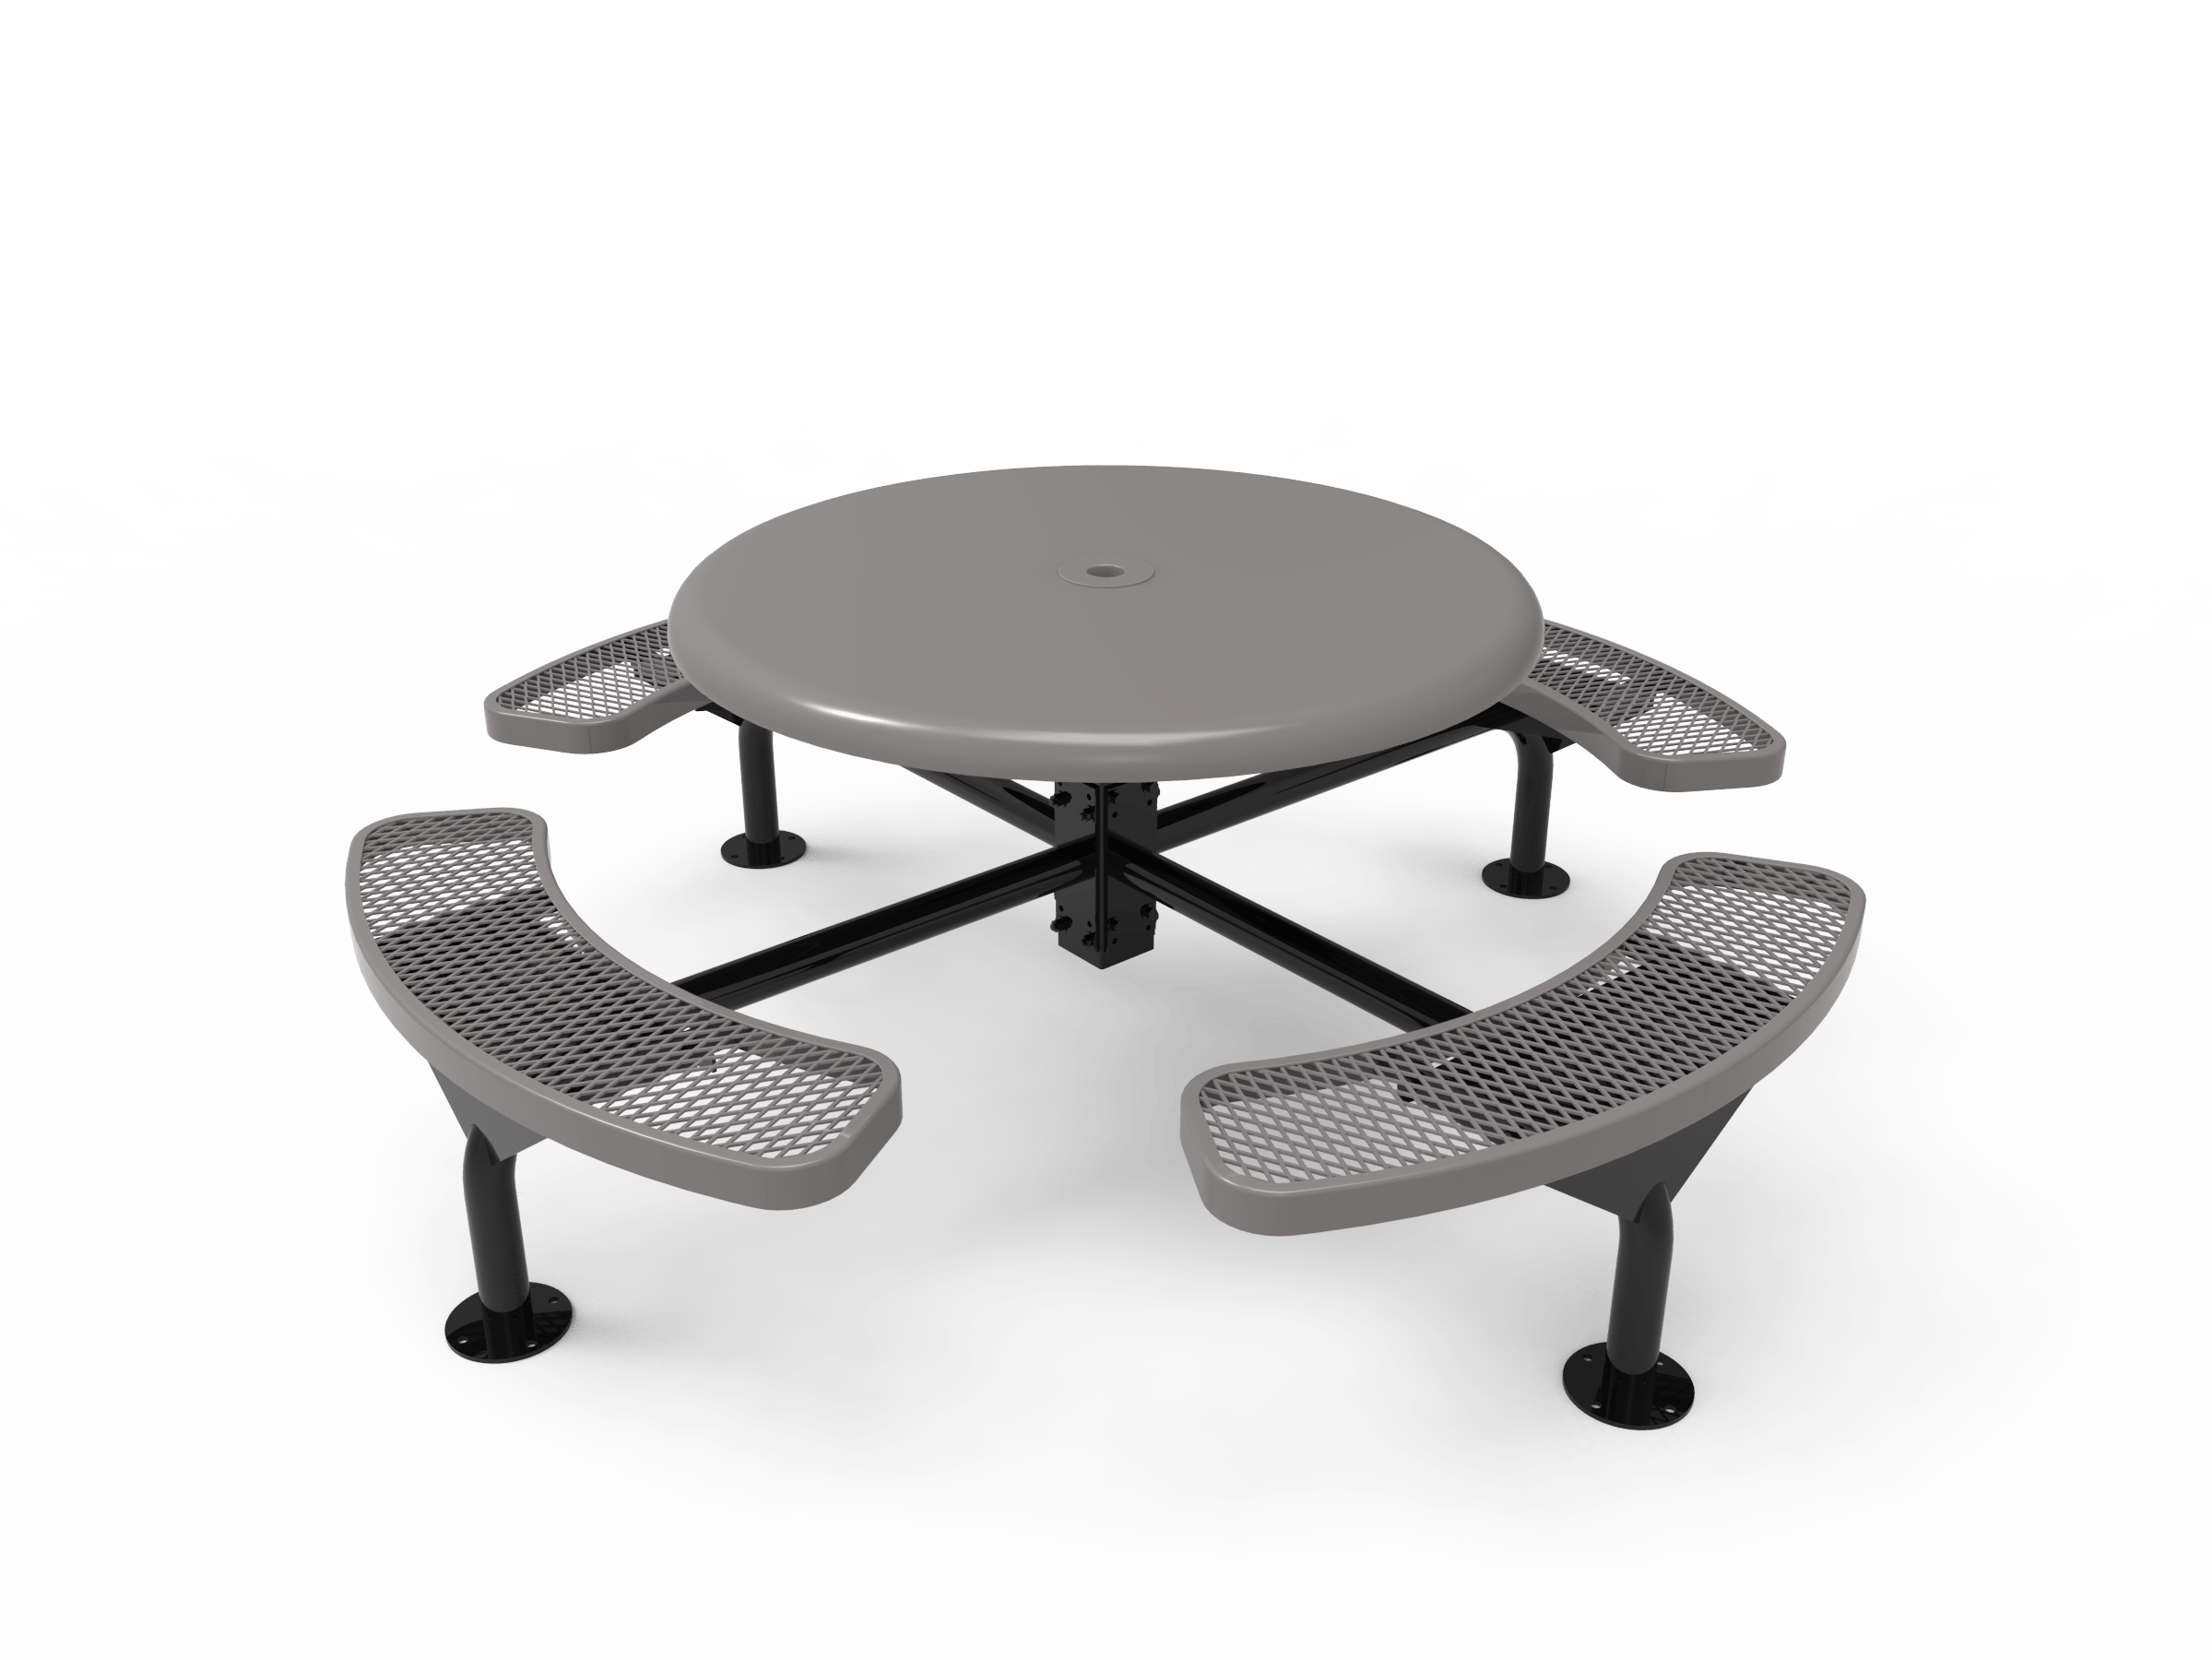 46″ Round Solid Top Nexus Surface Table With 4 Seats-Mesh
TRS46-C-48-000
Industry Standard Finish
$1489.00
TRS46-A-48-000
Advantage Premium Finish
$1879.00
